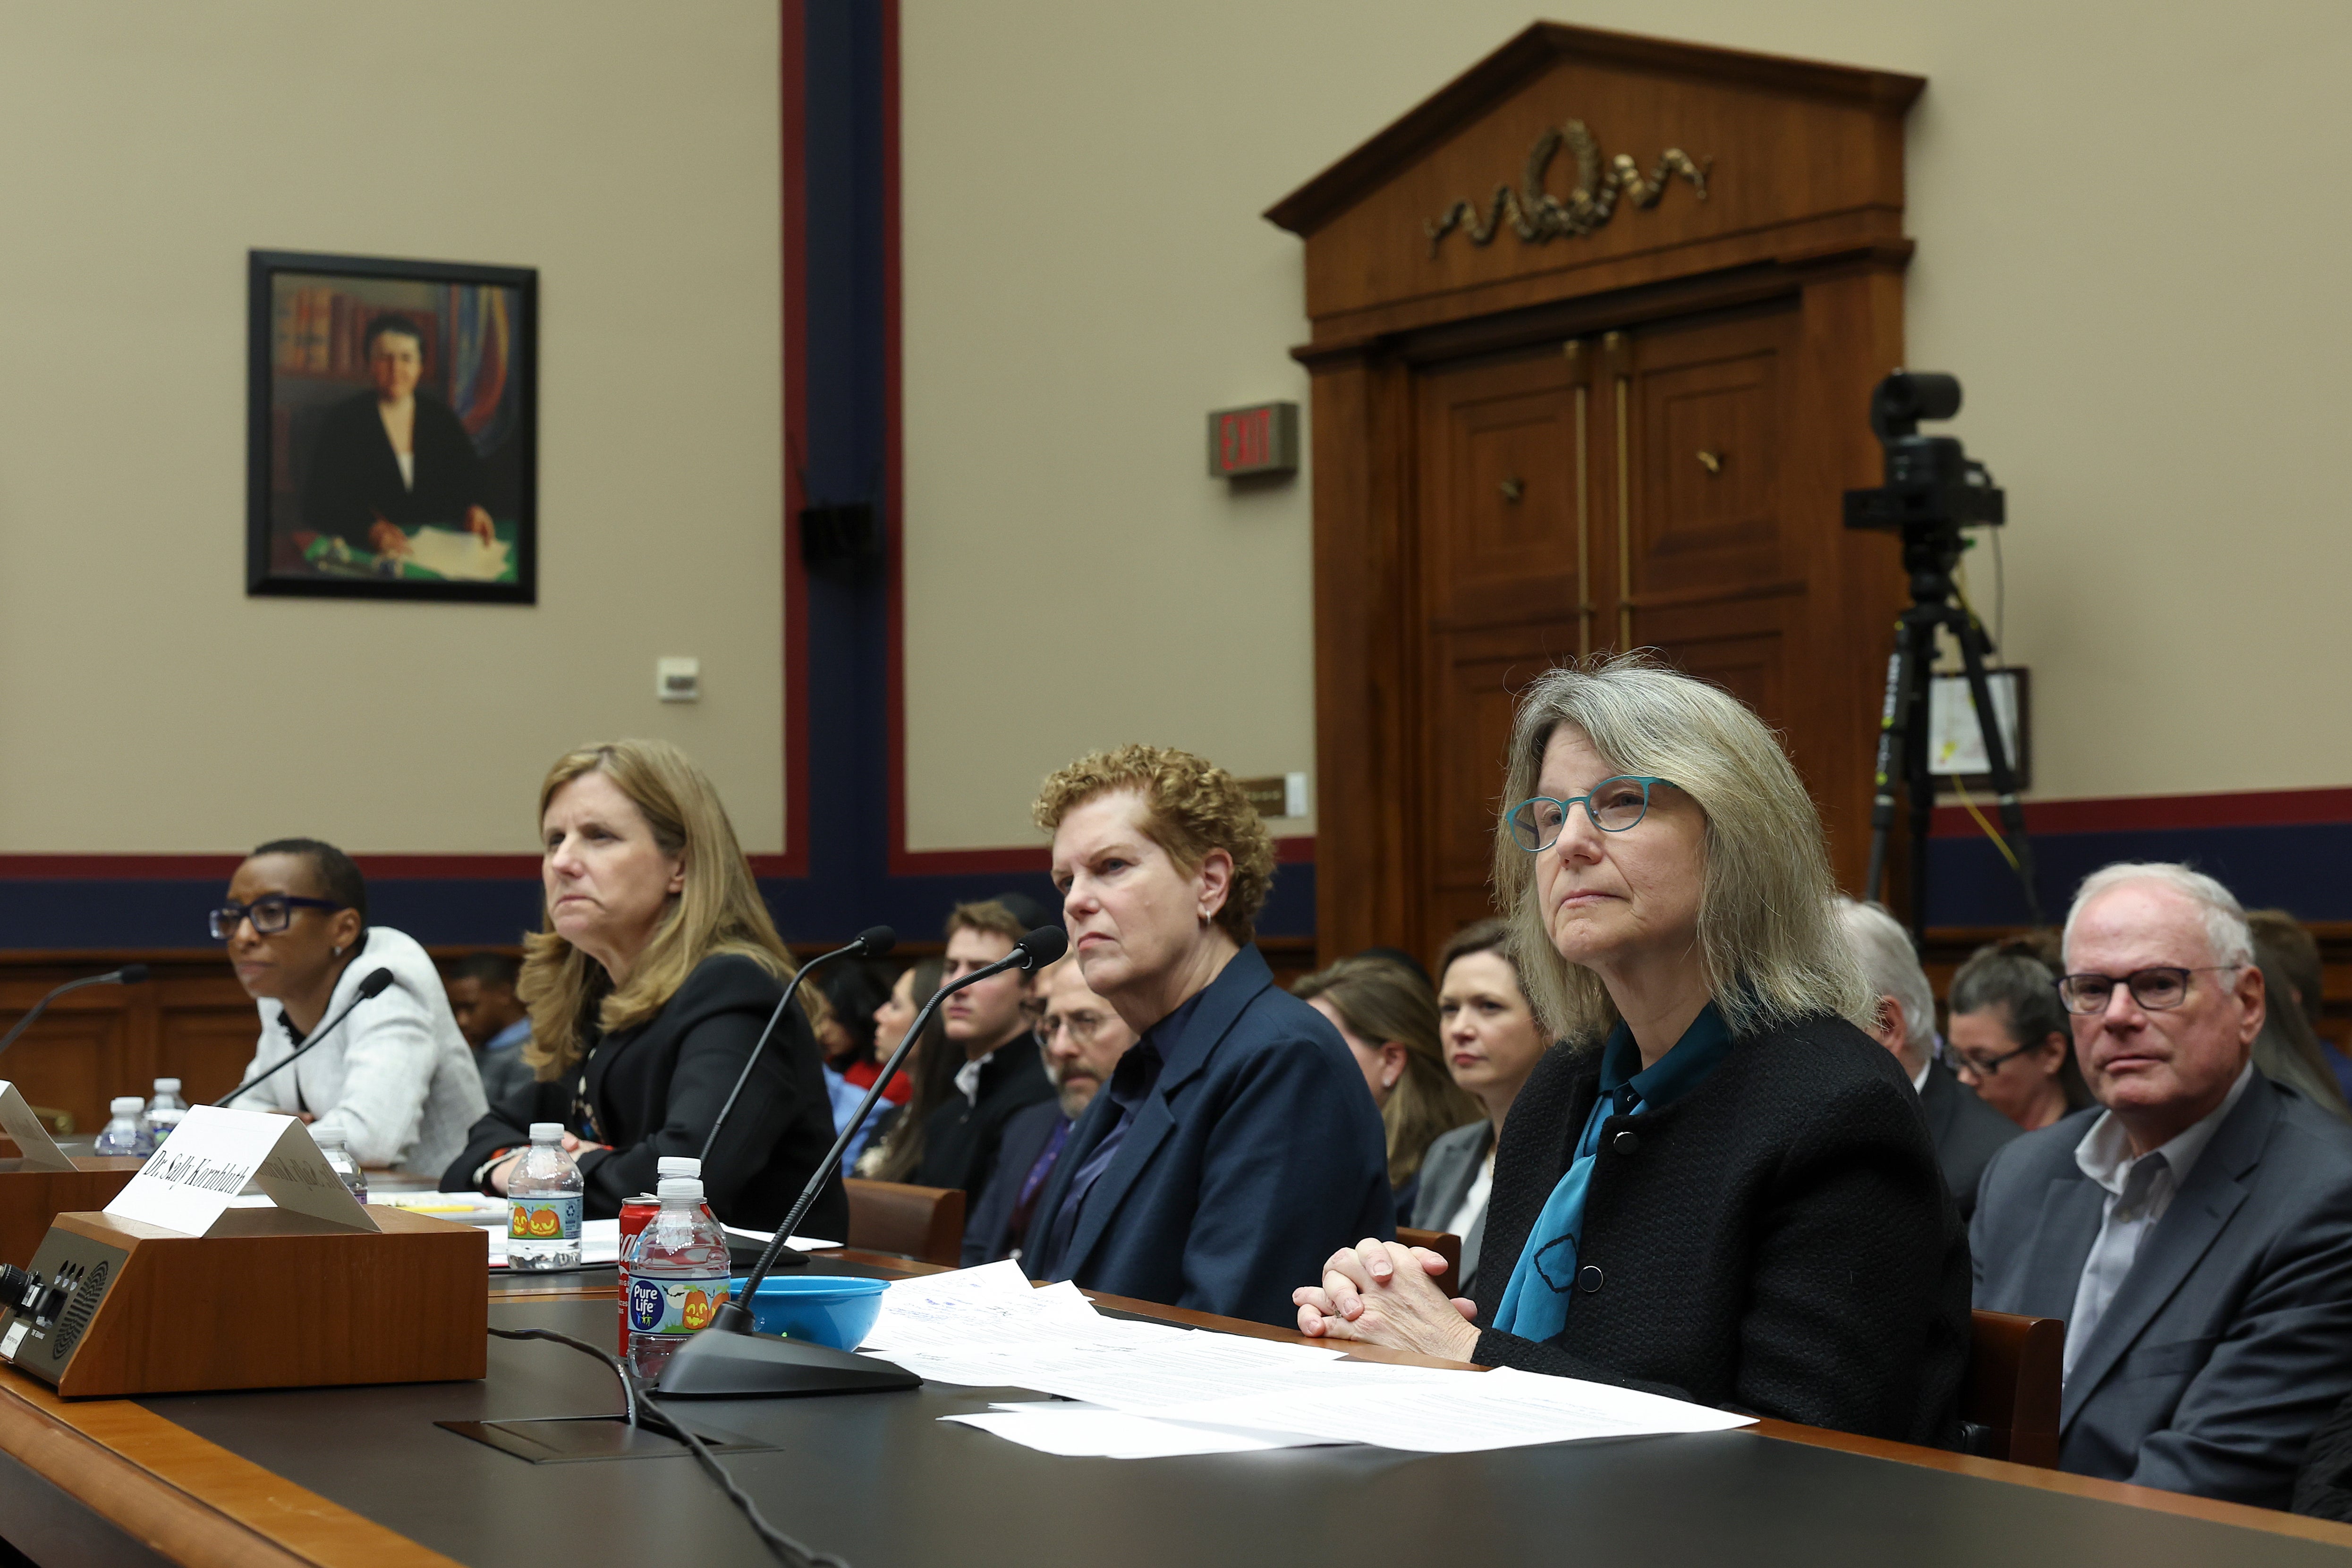 From left to right, Dr. Claudine Gay, President of Harvard University, Liz Magill, President of University of Pennsylvania, Dr. Pamela Nadell, Professor of History and Jewish Studies at American University, and Dr. Sally Kornbluth, President of Massachusetts Institute of Technology